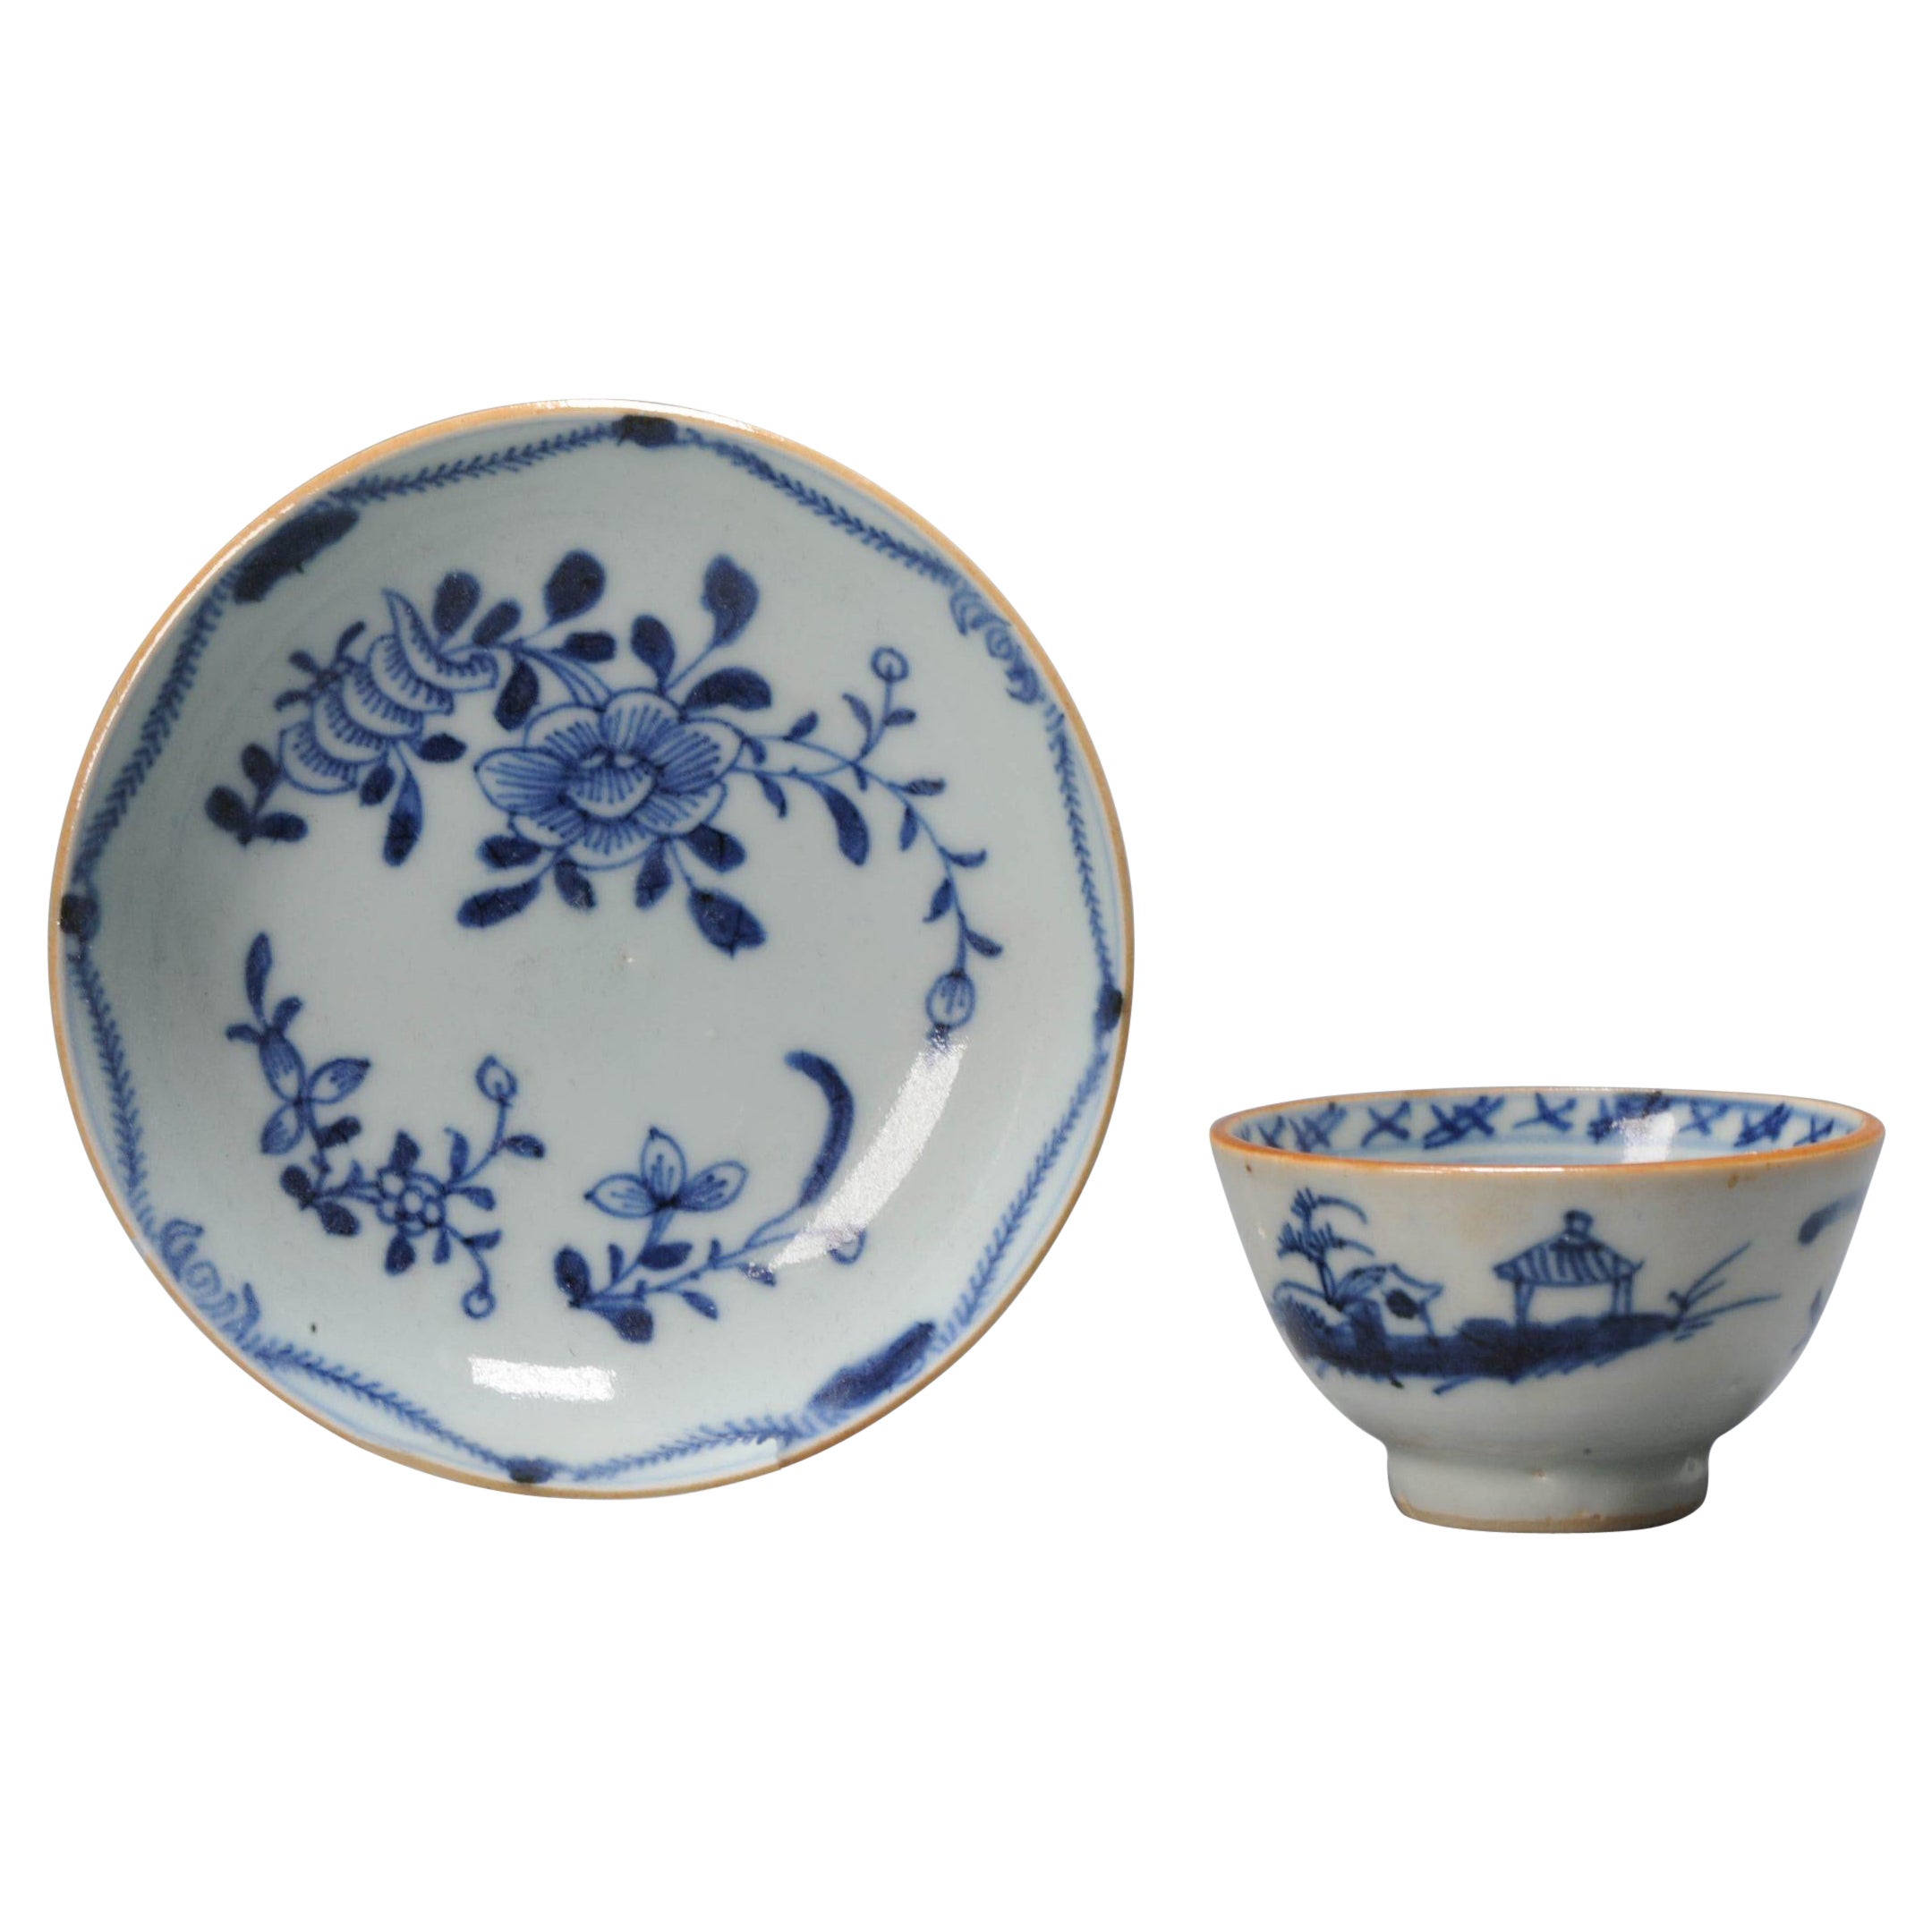 A Chinese Export Porcelain Blue and White Teabowl and Saucer